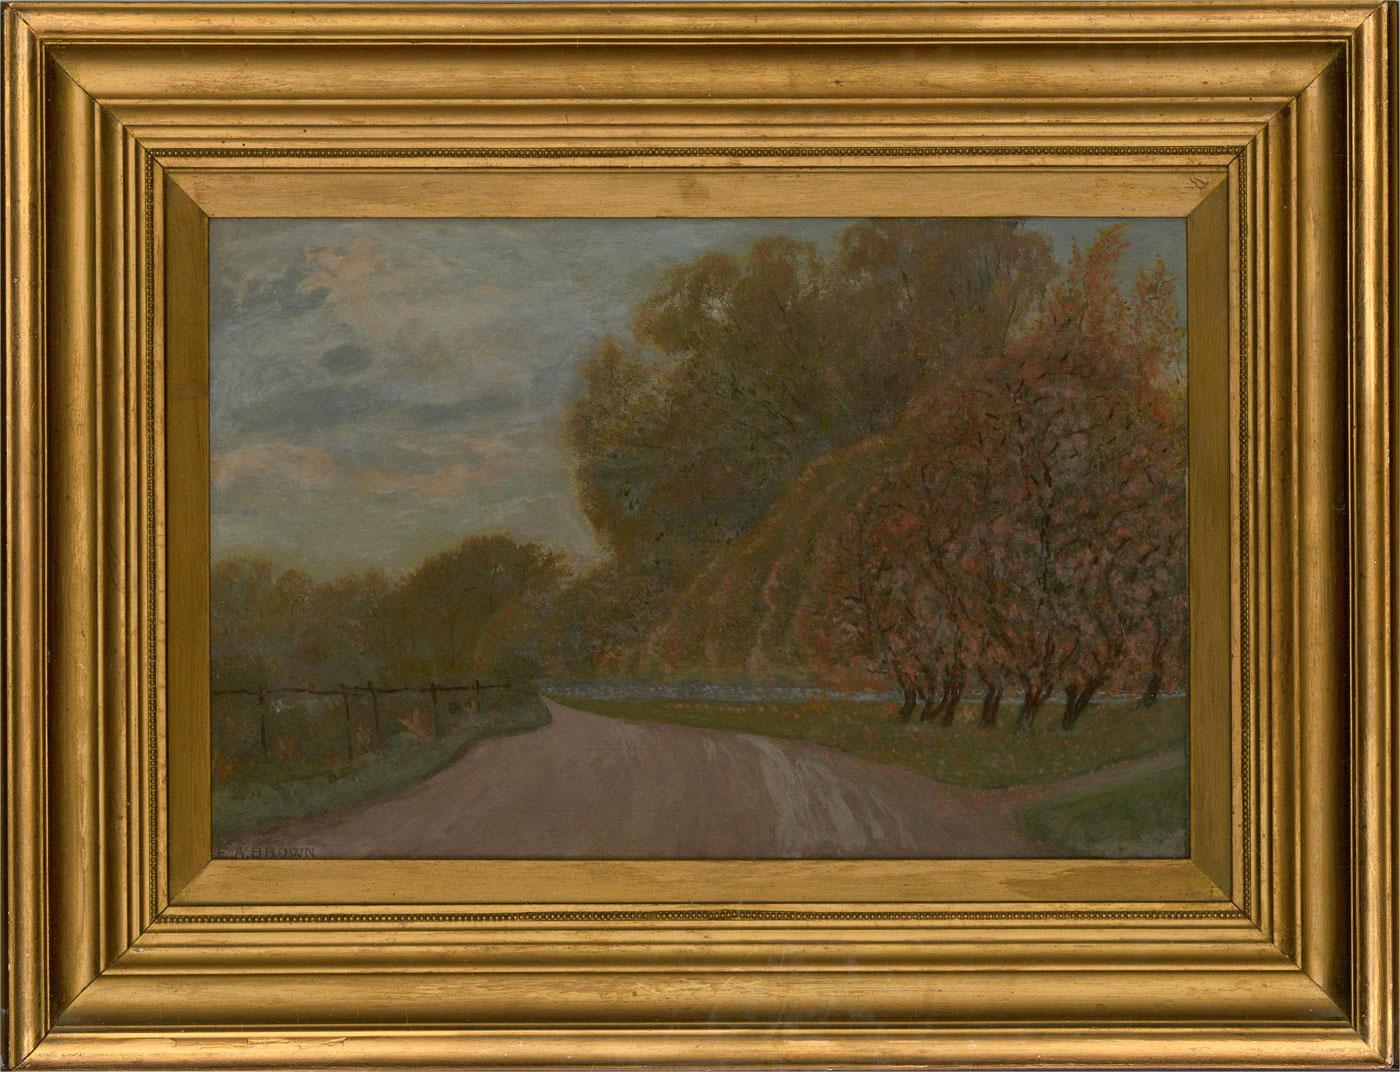 A scene depicting a country track surrounded by autumnal trees. Presented in a gold-painted wooden frame. Signed to the lower-left edge. Inscribed on the verso with the date and title. On canvas board.
